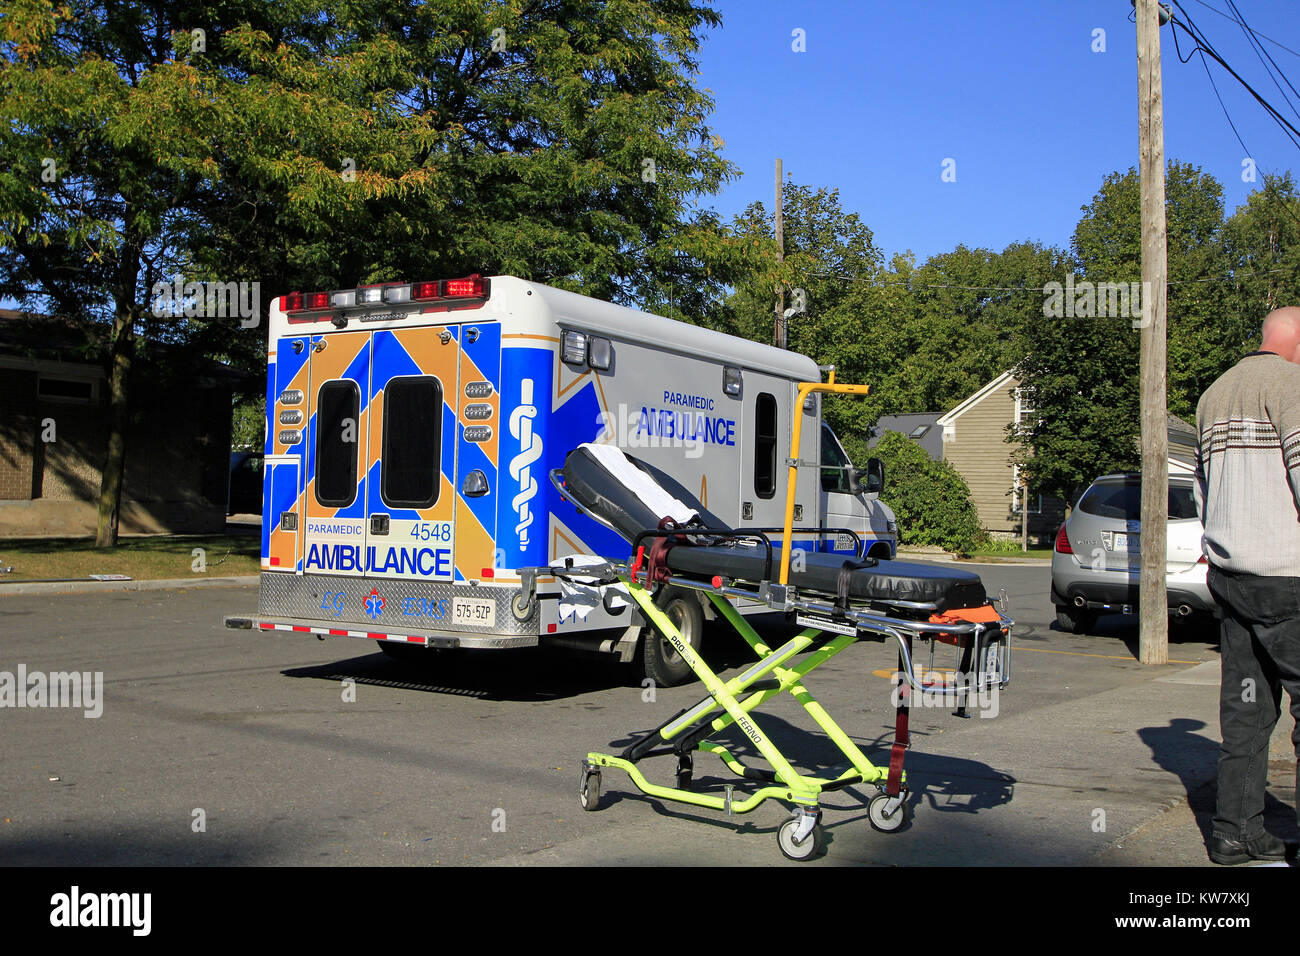 An ambulance at an accident scene Stock Photo